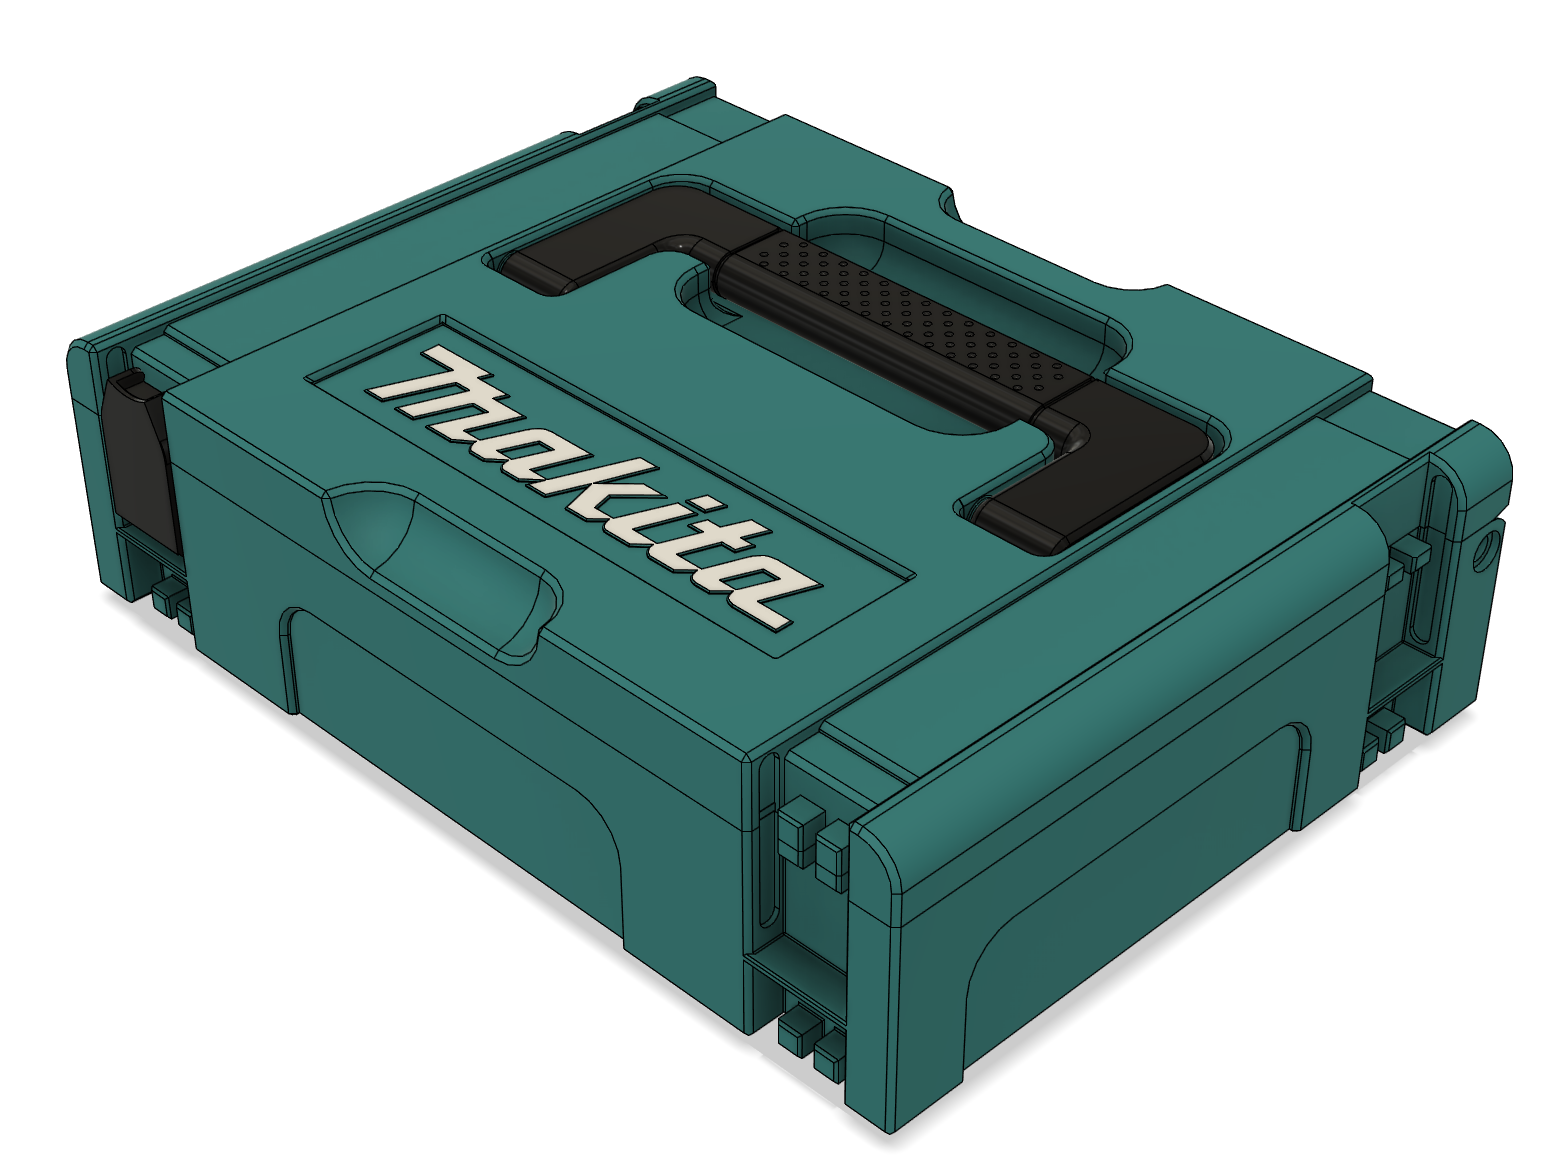 Makita systainer et coffrets